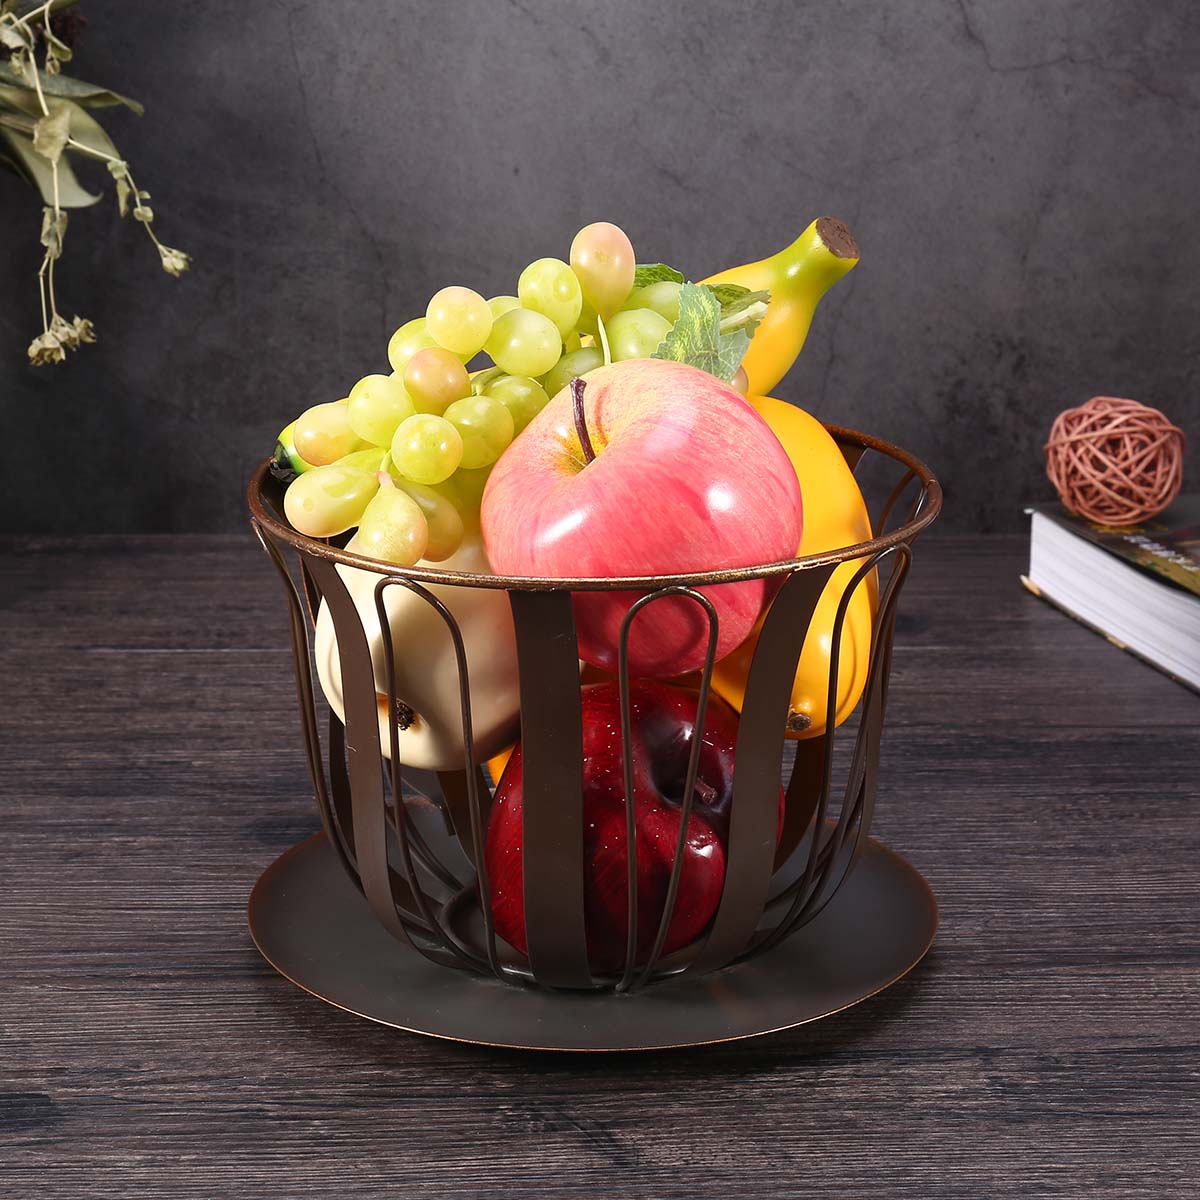 Kitchen Storage or Kitchen Storage Containers with Metal Baskets for Fruit and Coffe Pod Holder